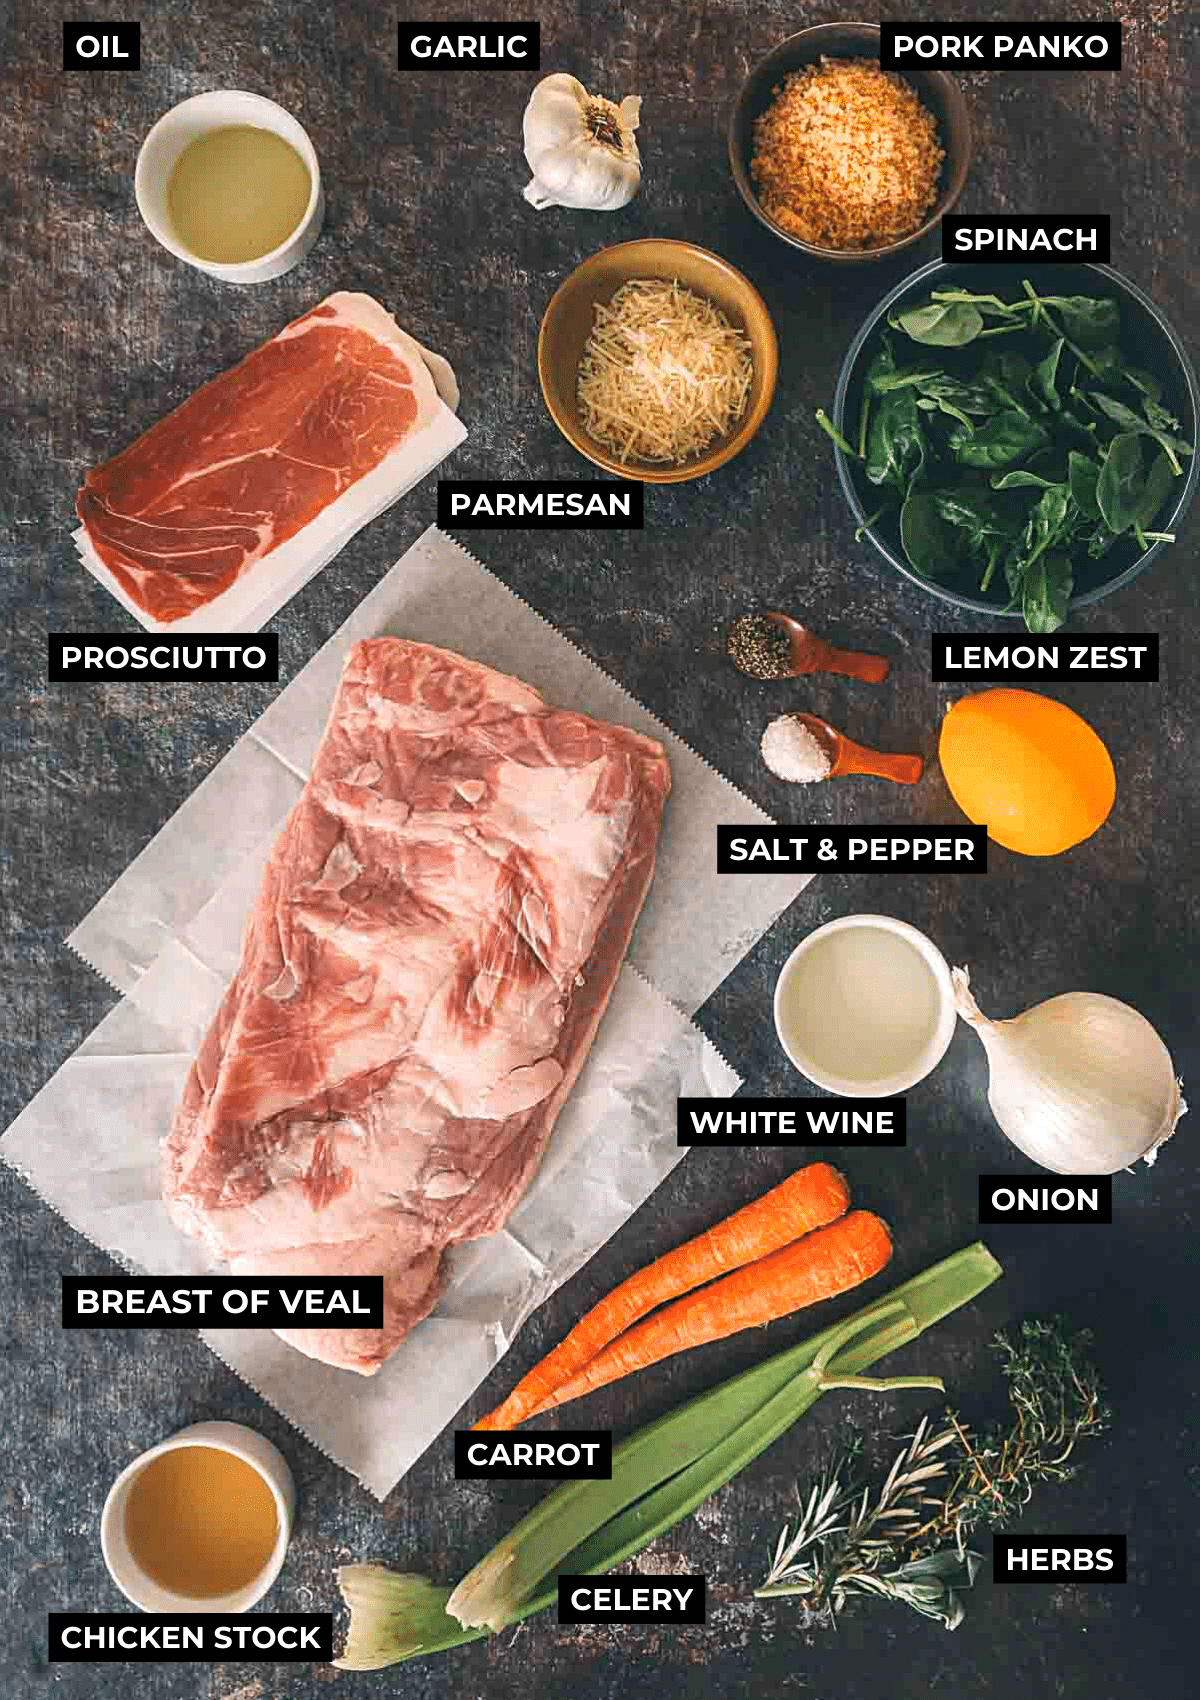 Ingredients for the veal breast recipe. 